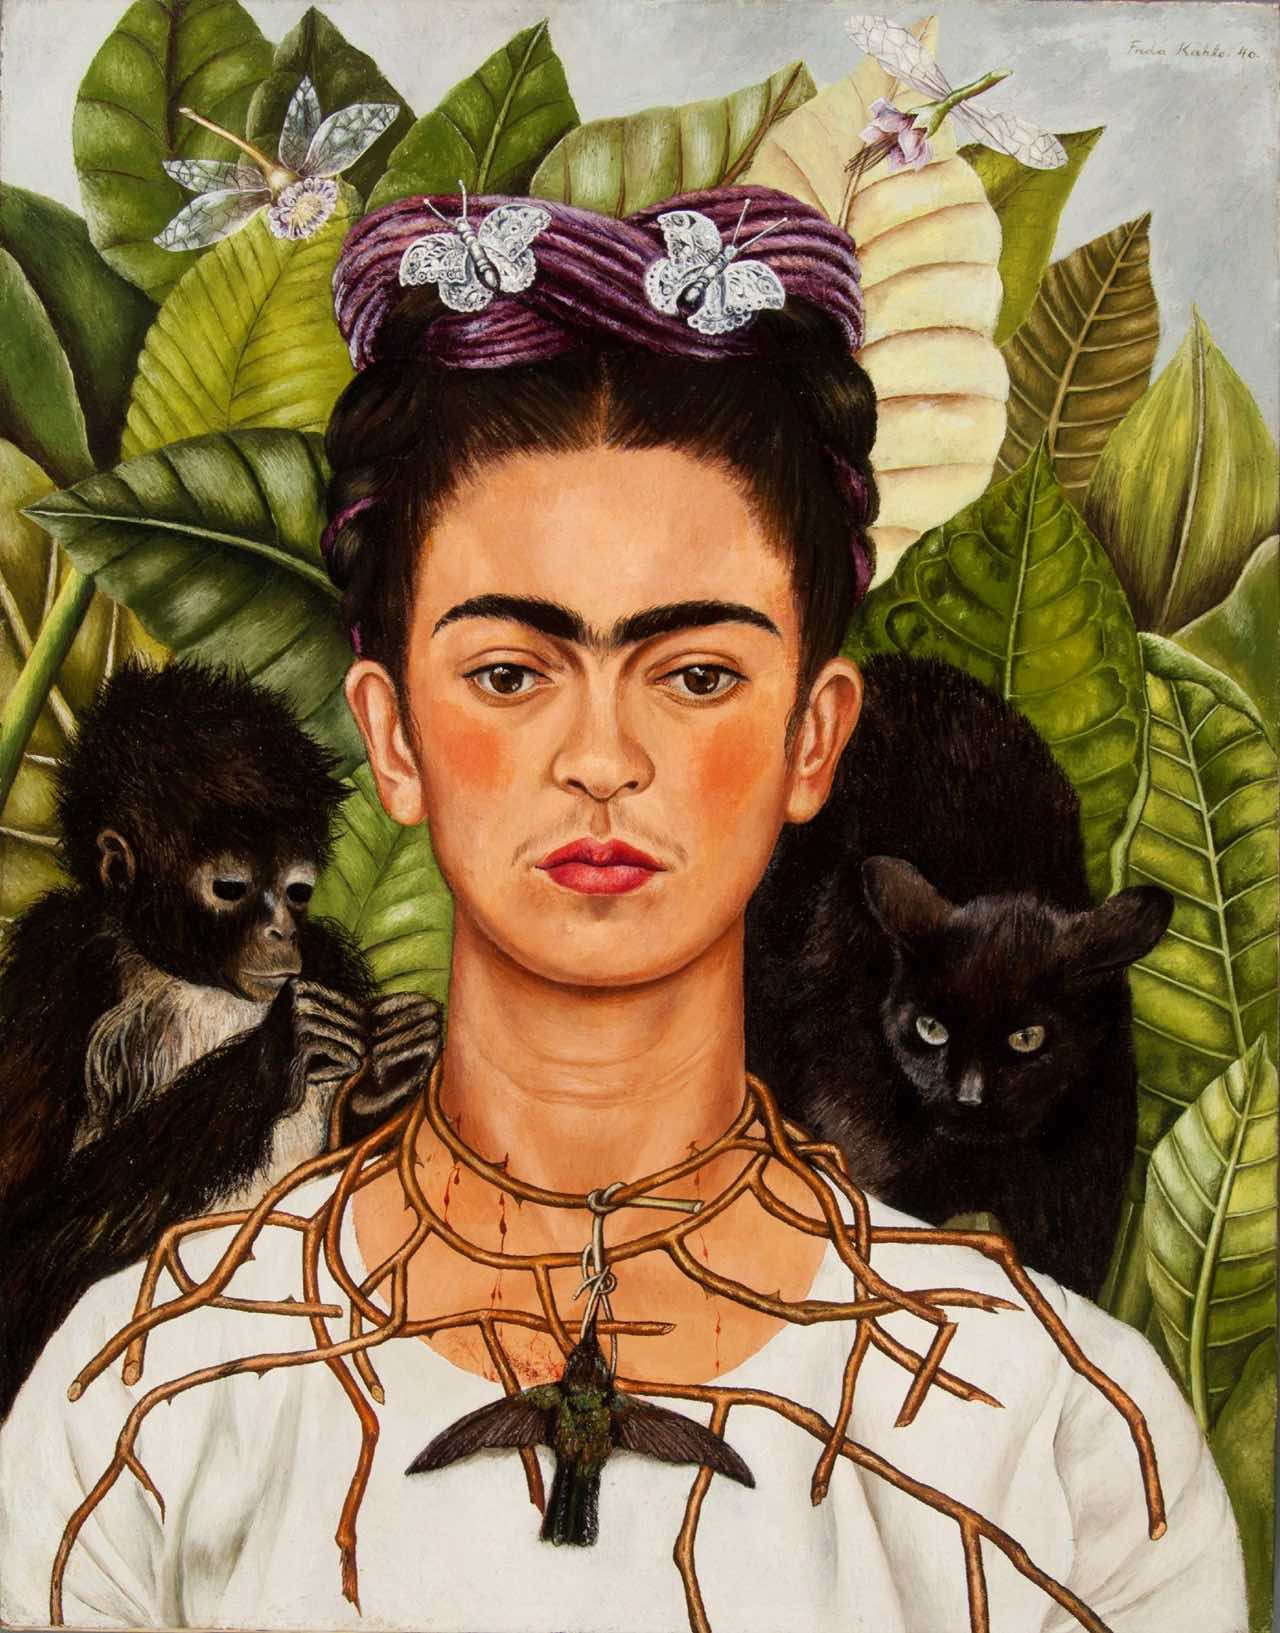 Self Portrait with Thorn Necklace and Hummingbird – Frida Kahlo